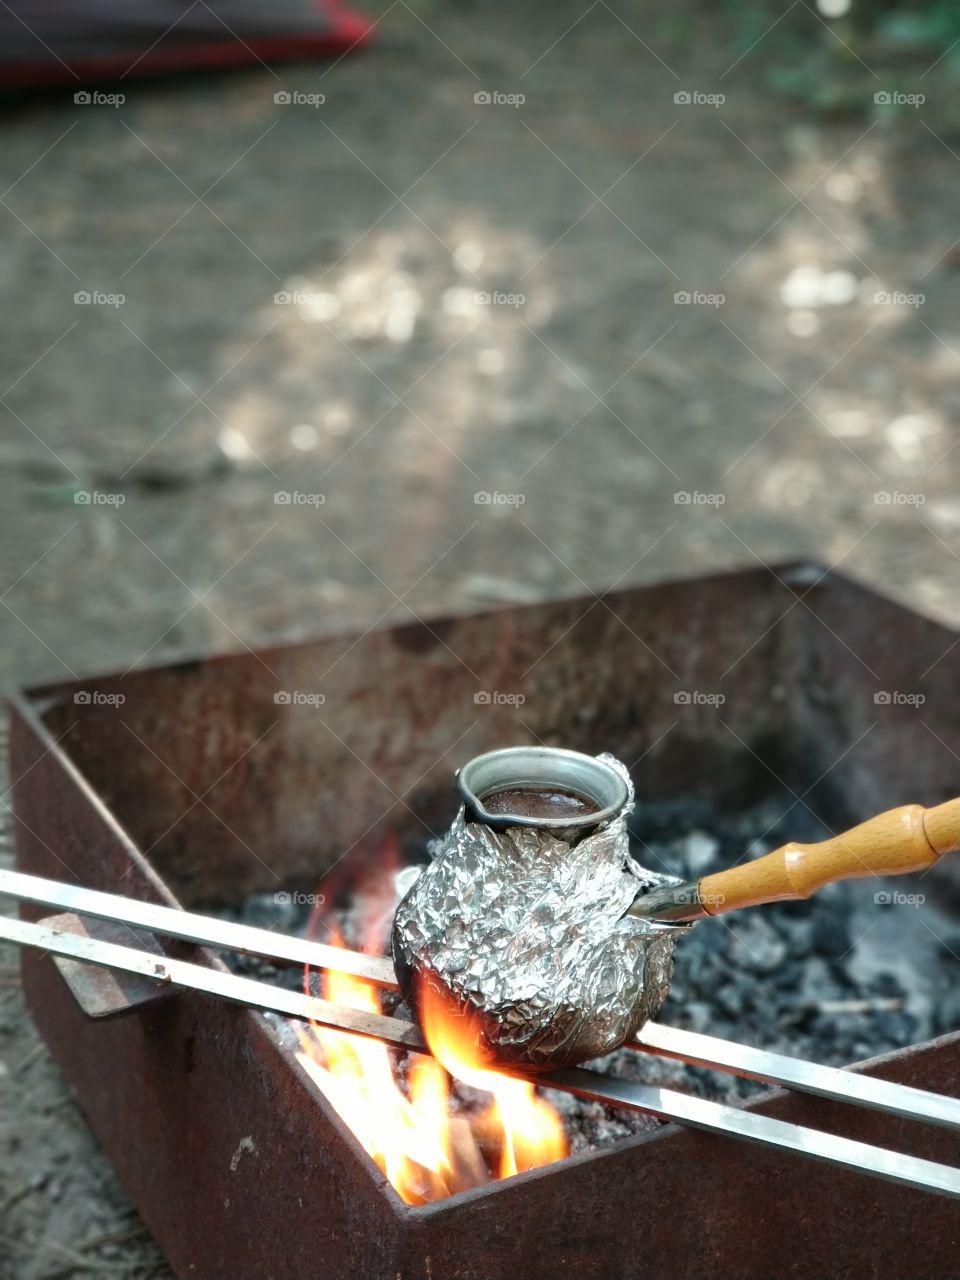 cooking out coffee over a fire